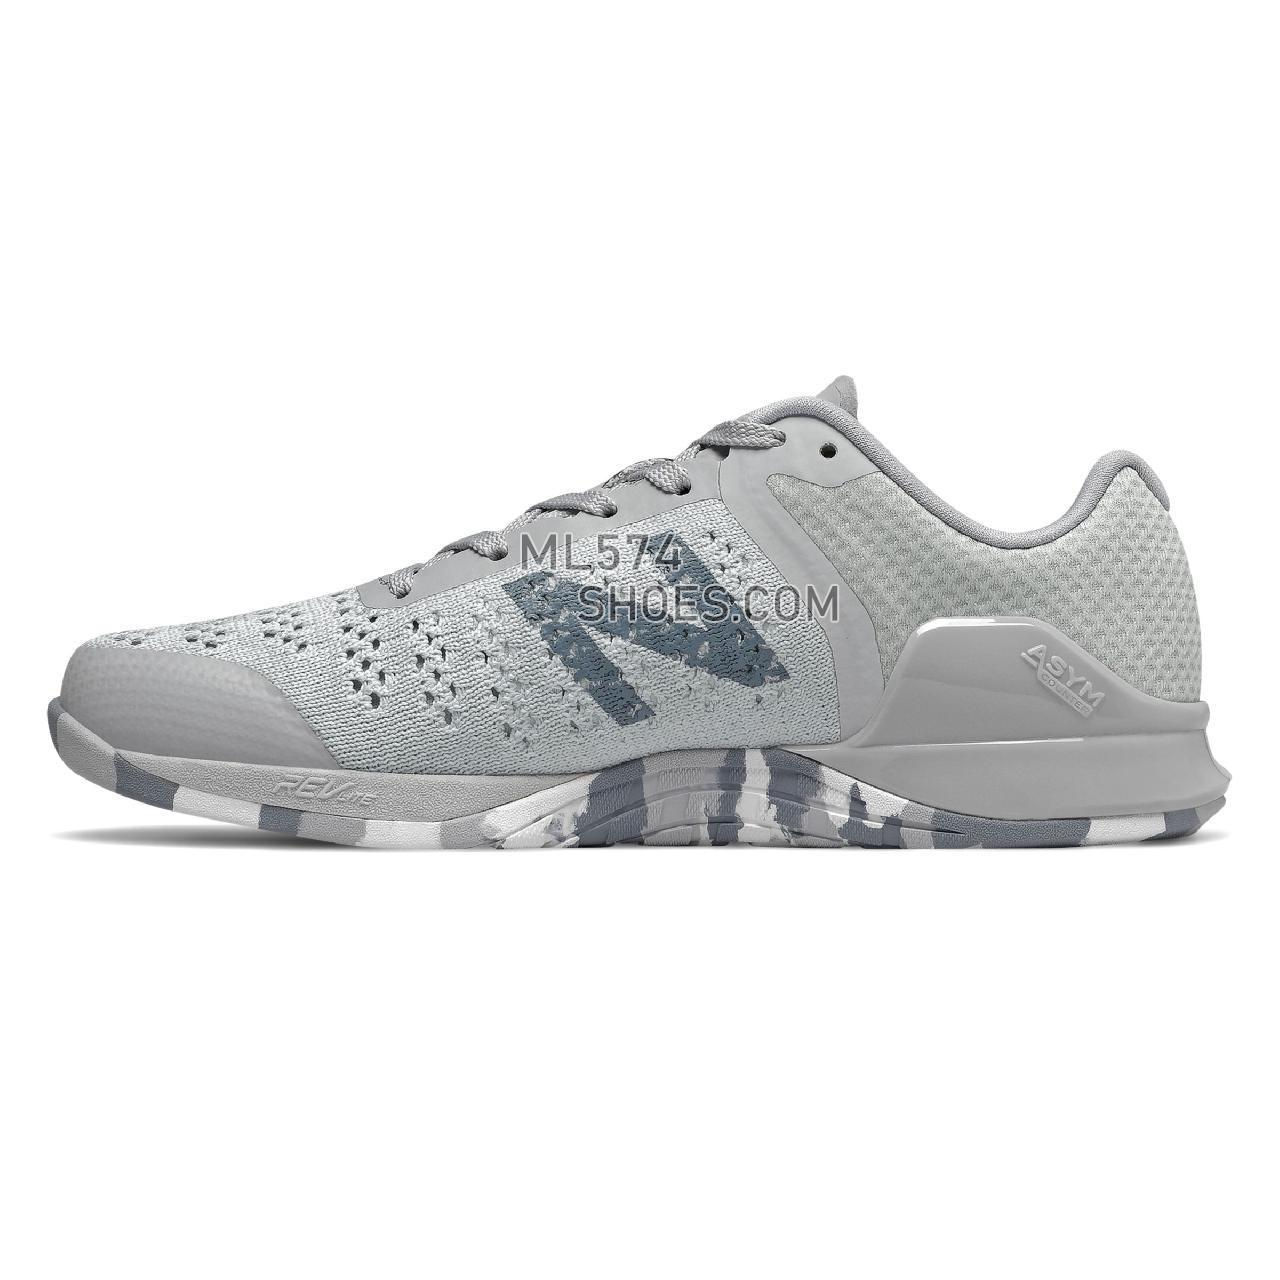 New Balance Minimus Prevail - Women's Workout - Light Aluminum with White and Reflection - WXMPCL1